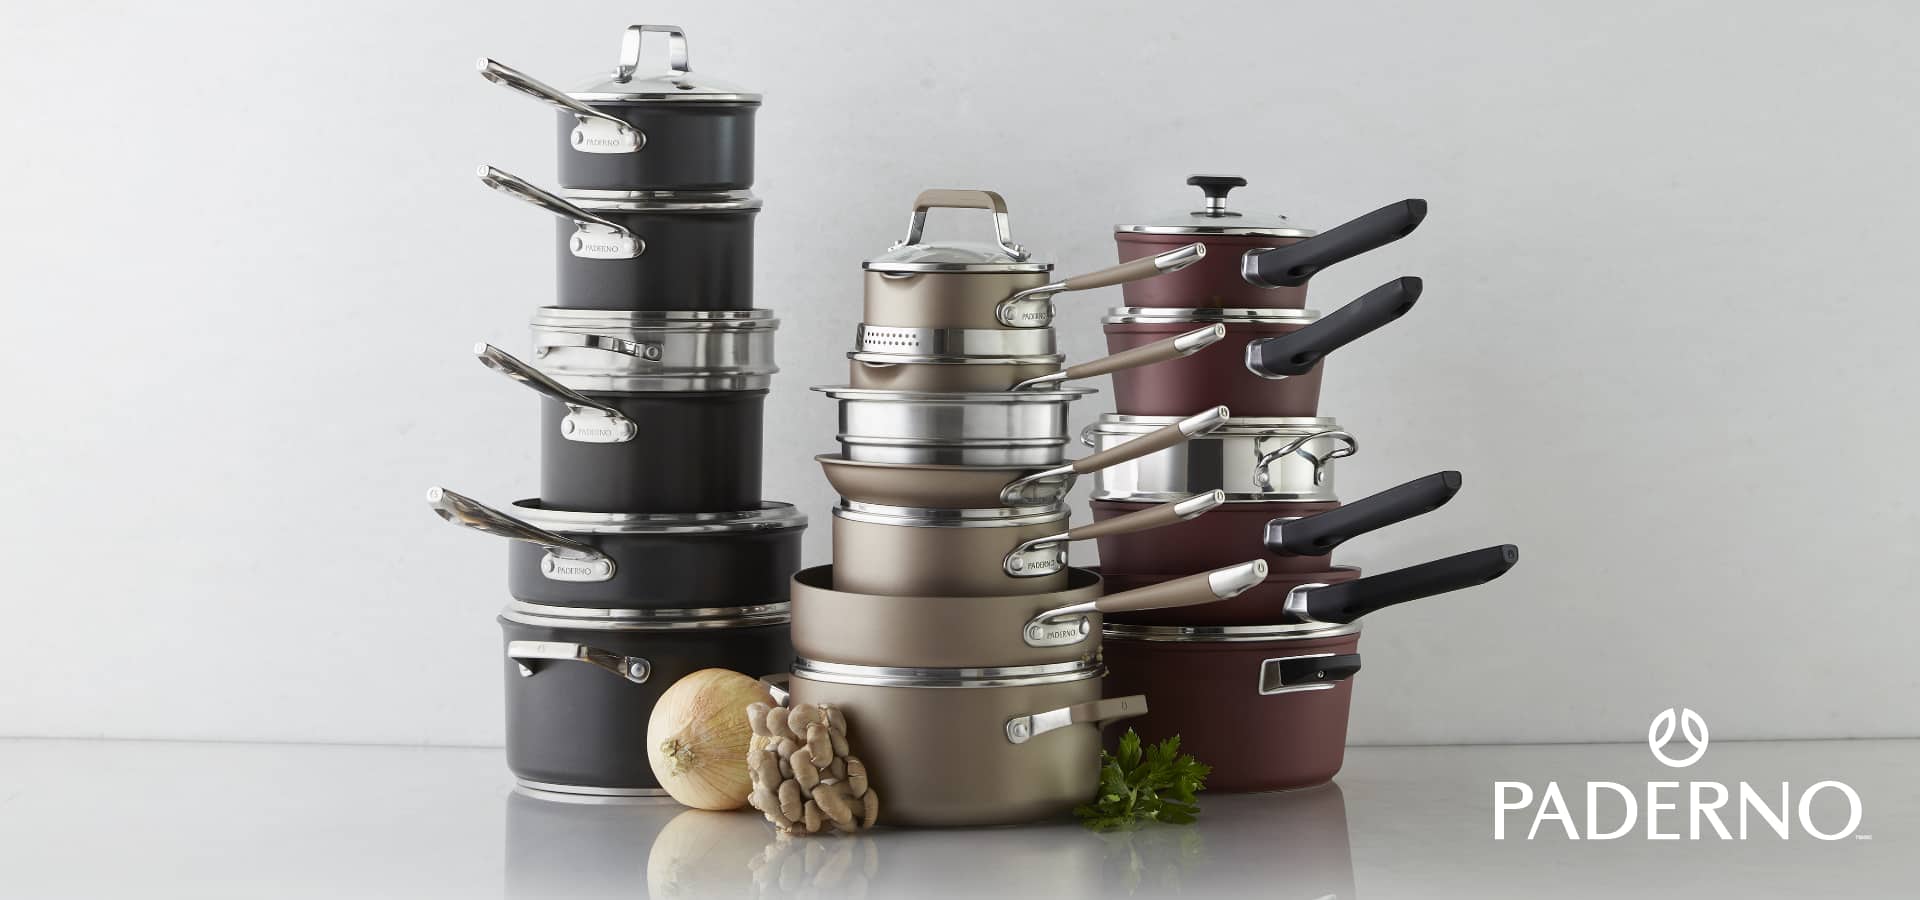 An assortment of pots and pans stacked up on top of each other.